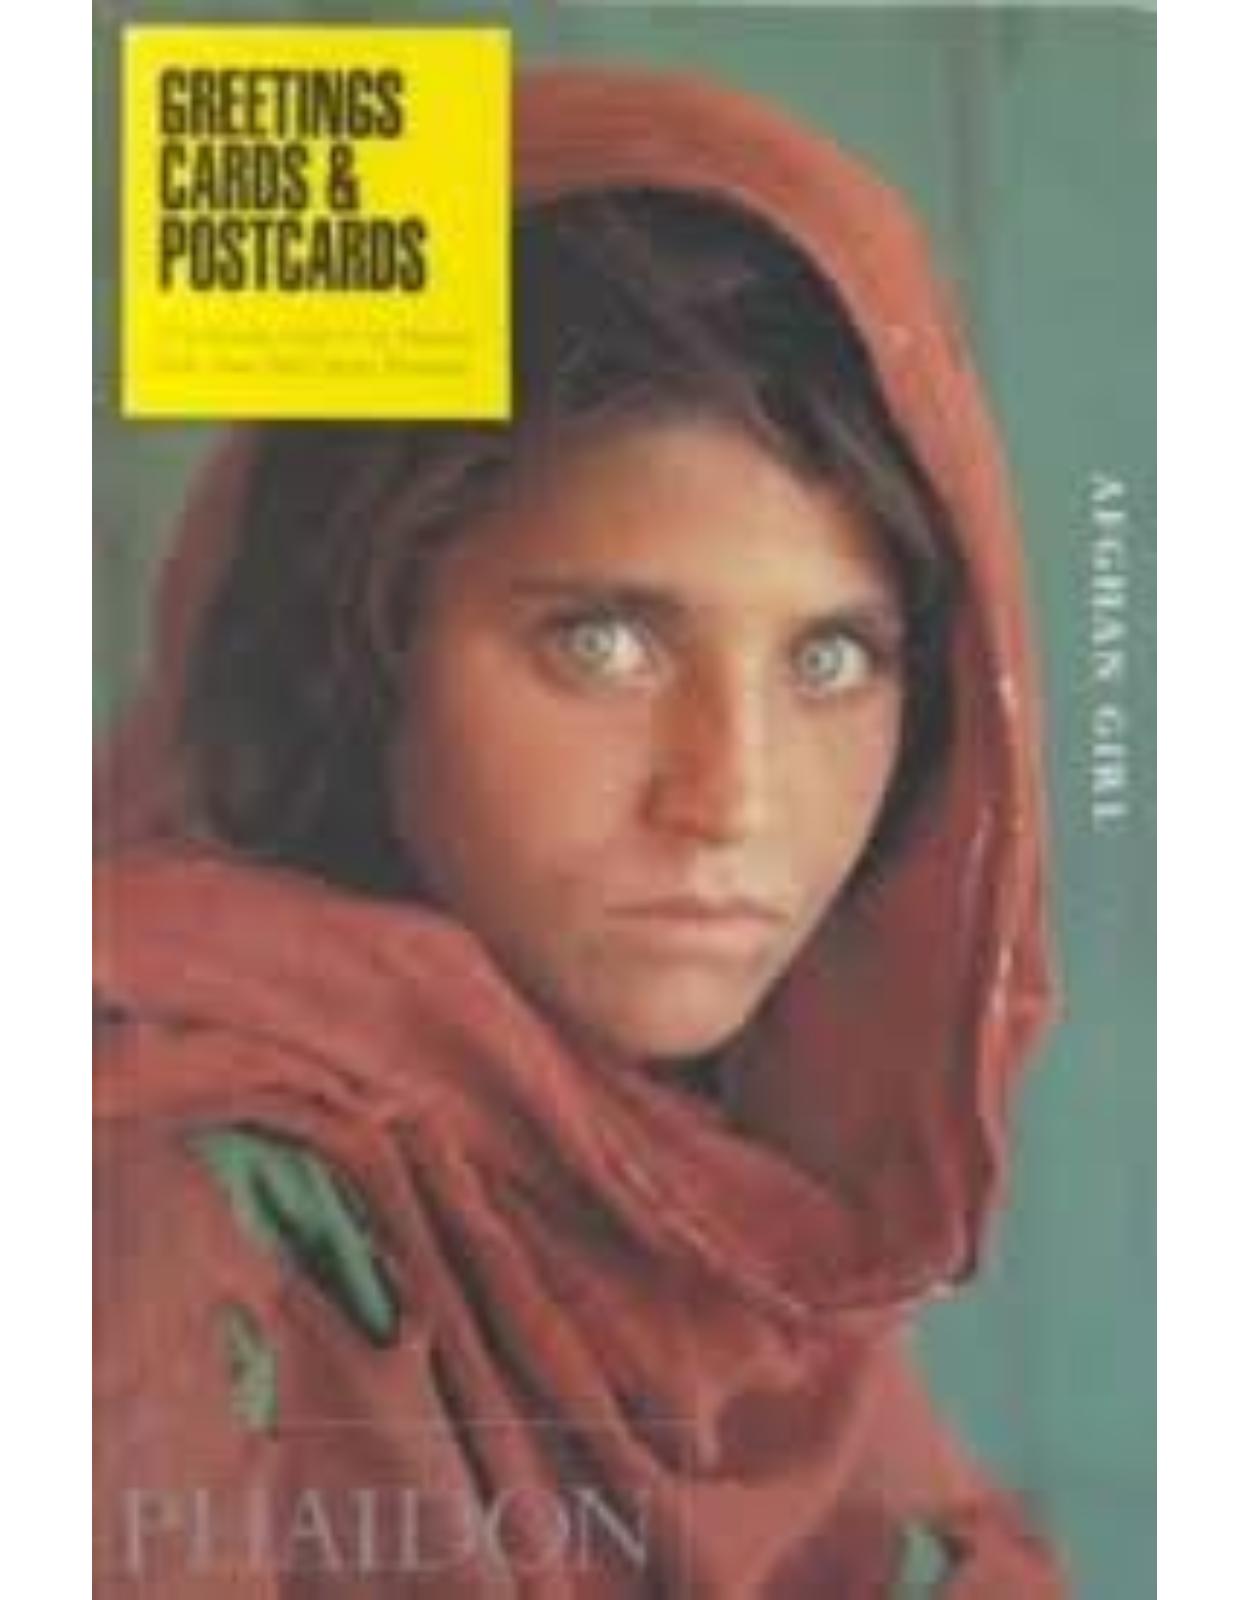 Steve McCurry; Afghan Girl Cards: Card Box (12 Postcards and 12 Greeting Cards with Envelopes)